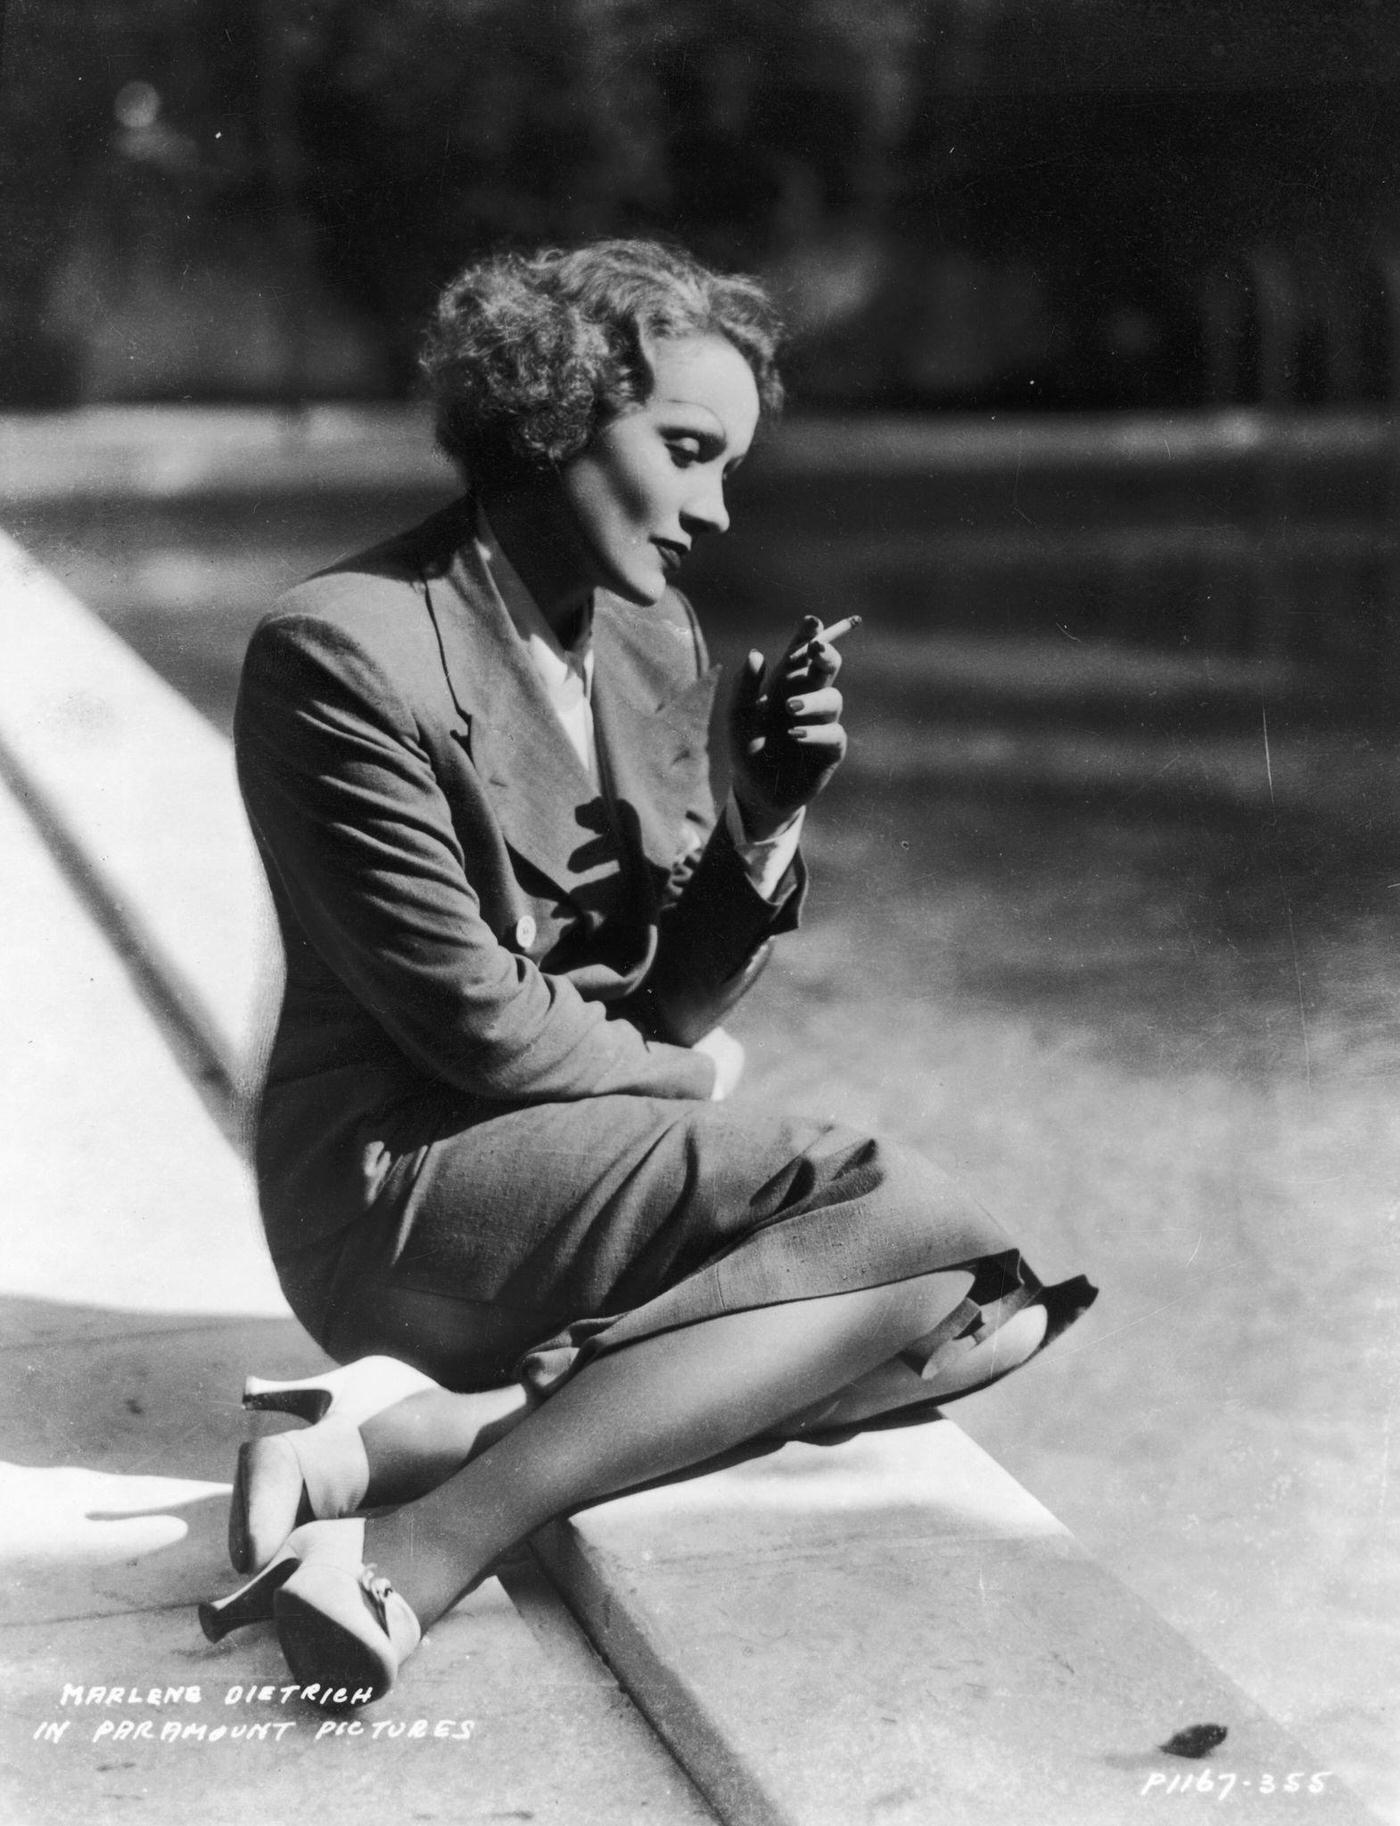 In 1932, Marlene Dietrich kneels by a lake while smoking a cigarette in a double-breasted suit.